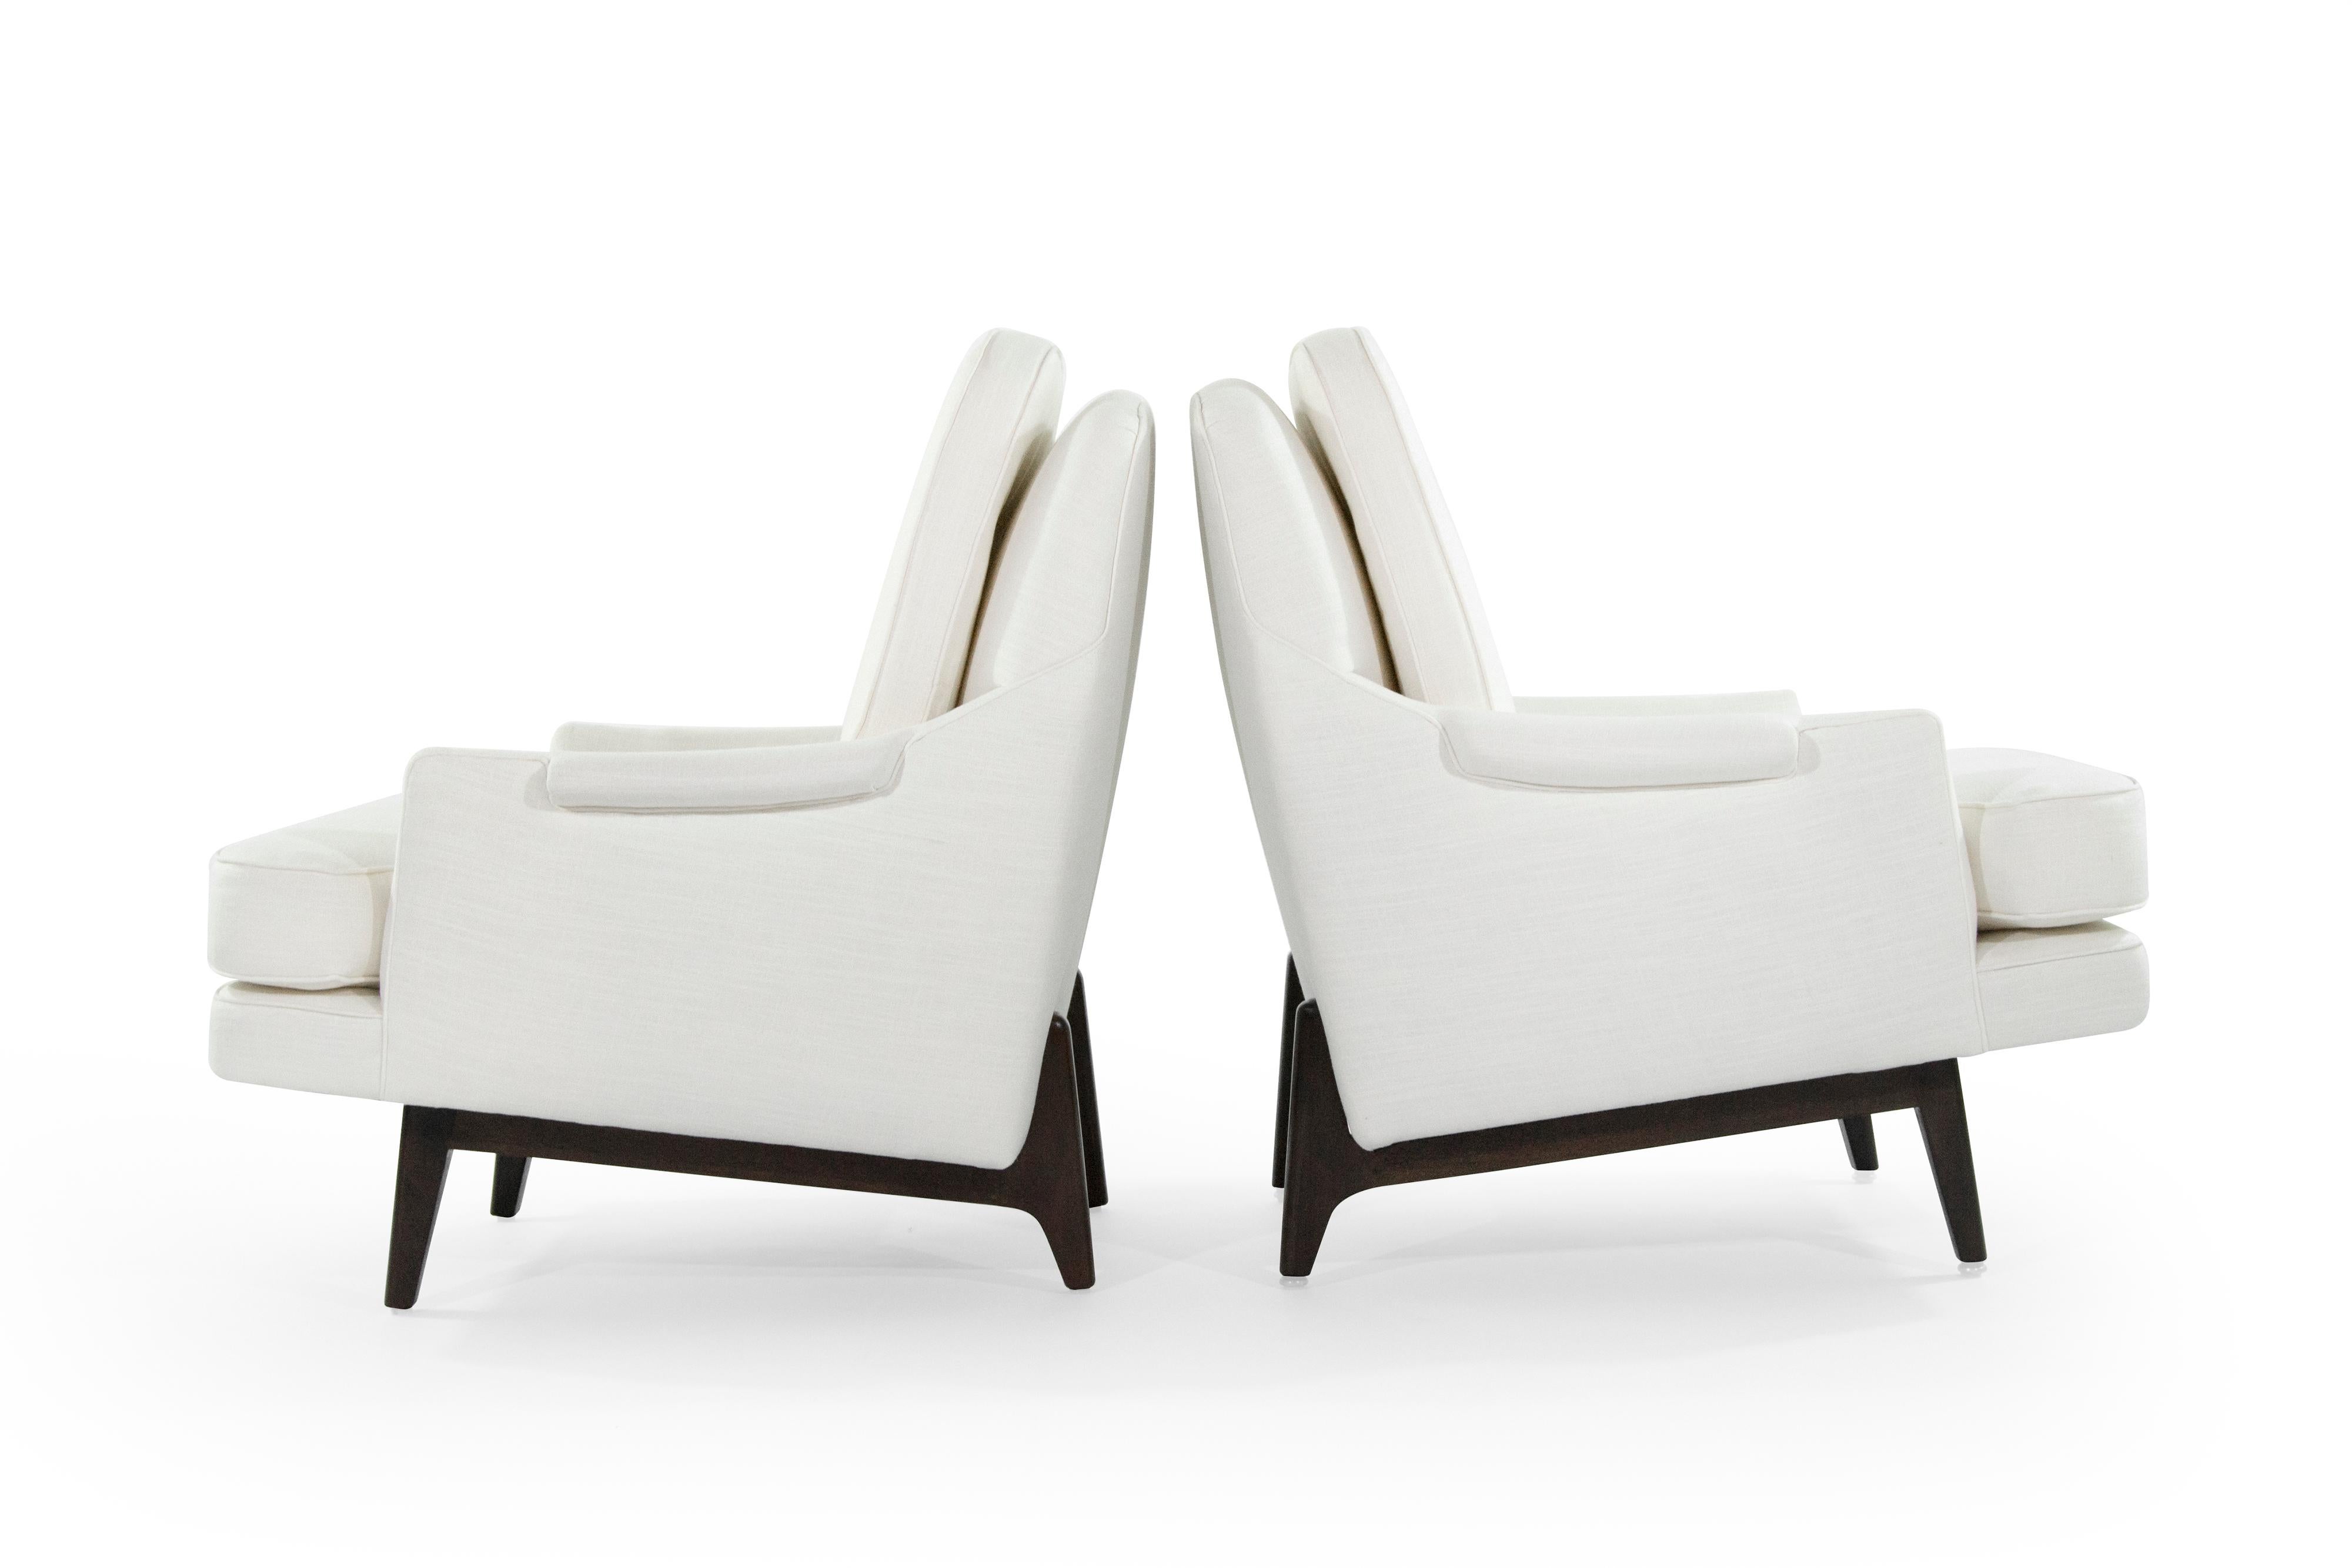 20th Century Pair of Reading Lounges by Roger Sprunger for Dunbar, 1950s